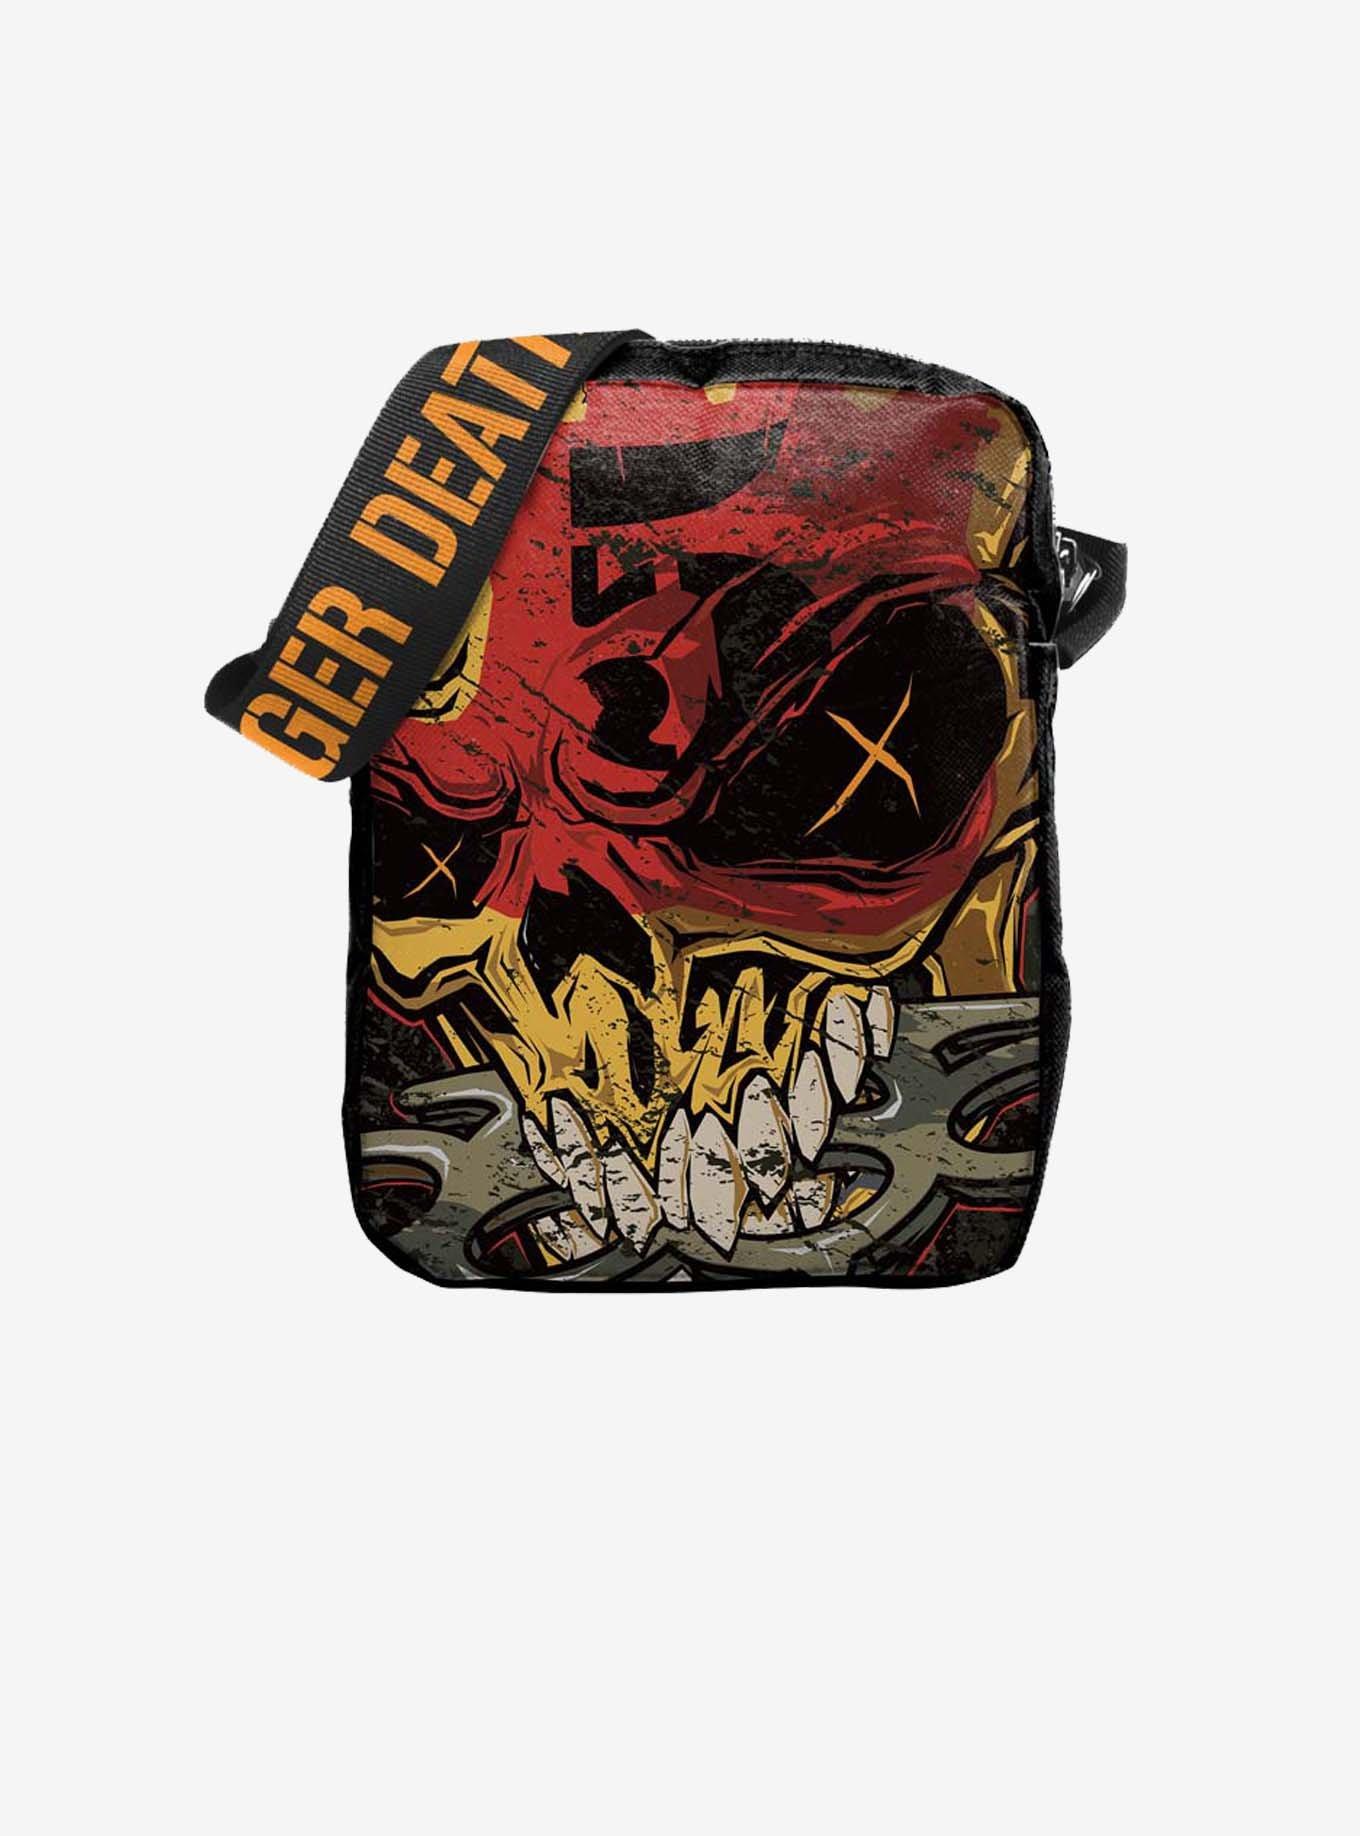 Rocksax Five Finger Death Punch The Way Of The Fist Crossbody Bag